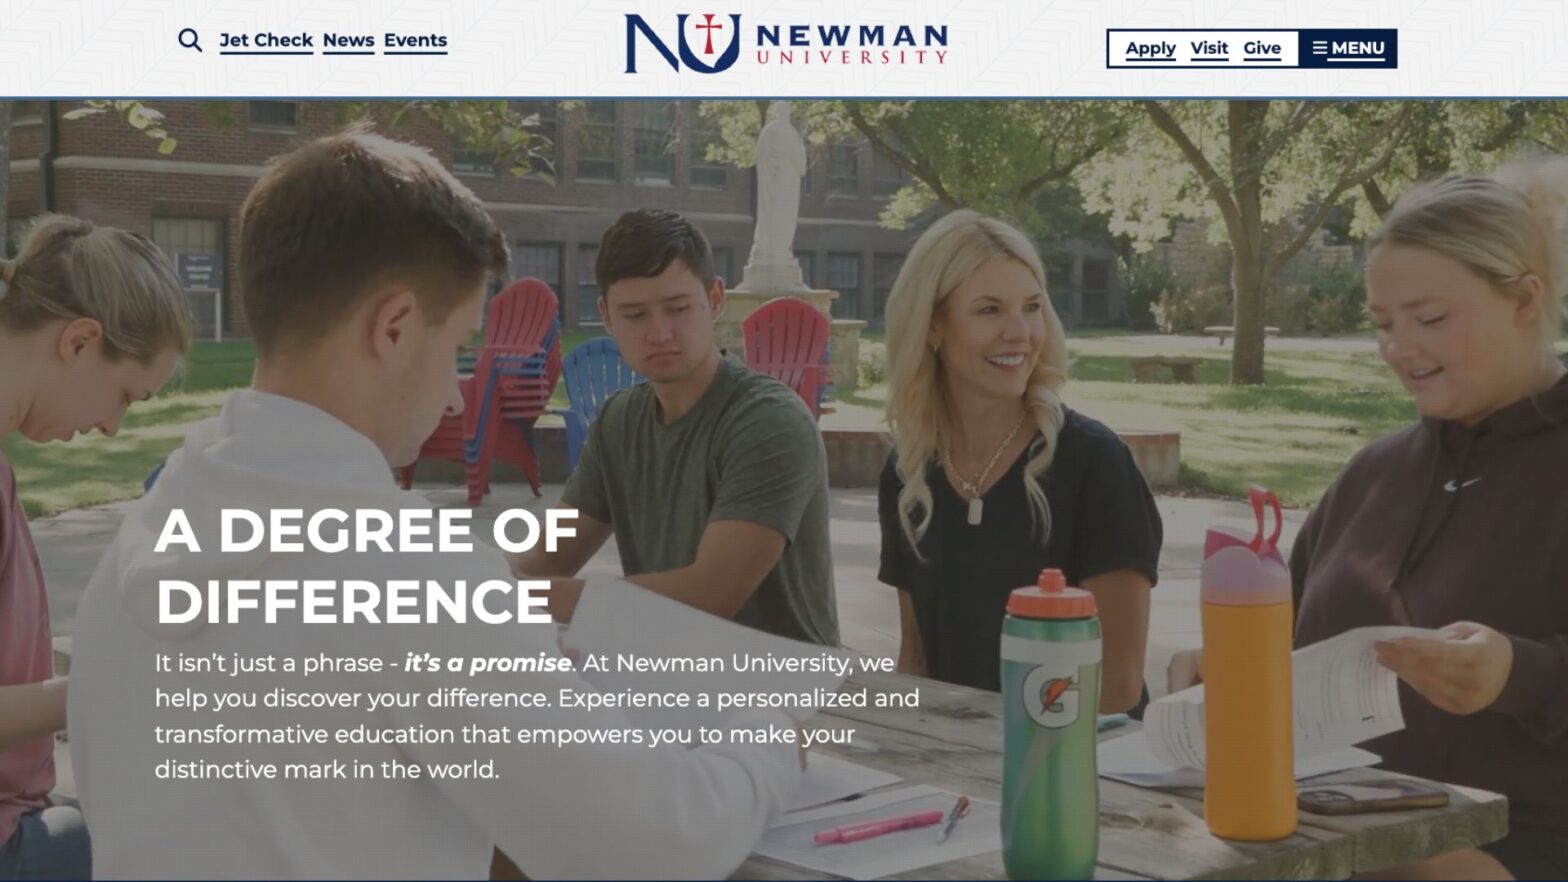 Newman homepage website features video clip of a professor interacting with students at a picnic table during an outdoor class.